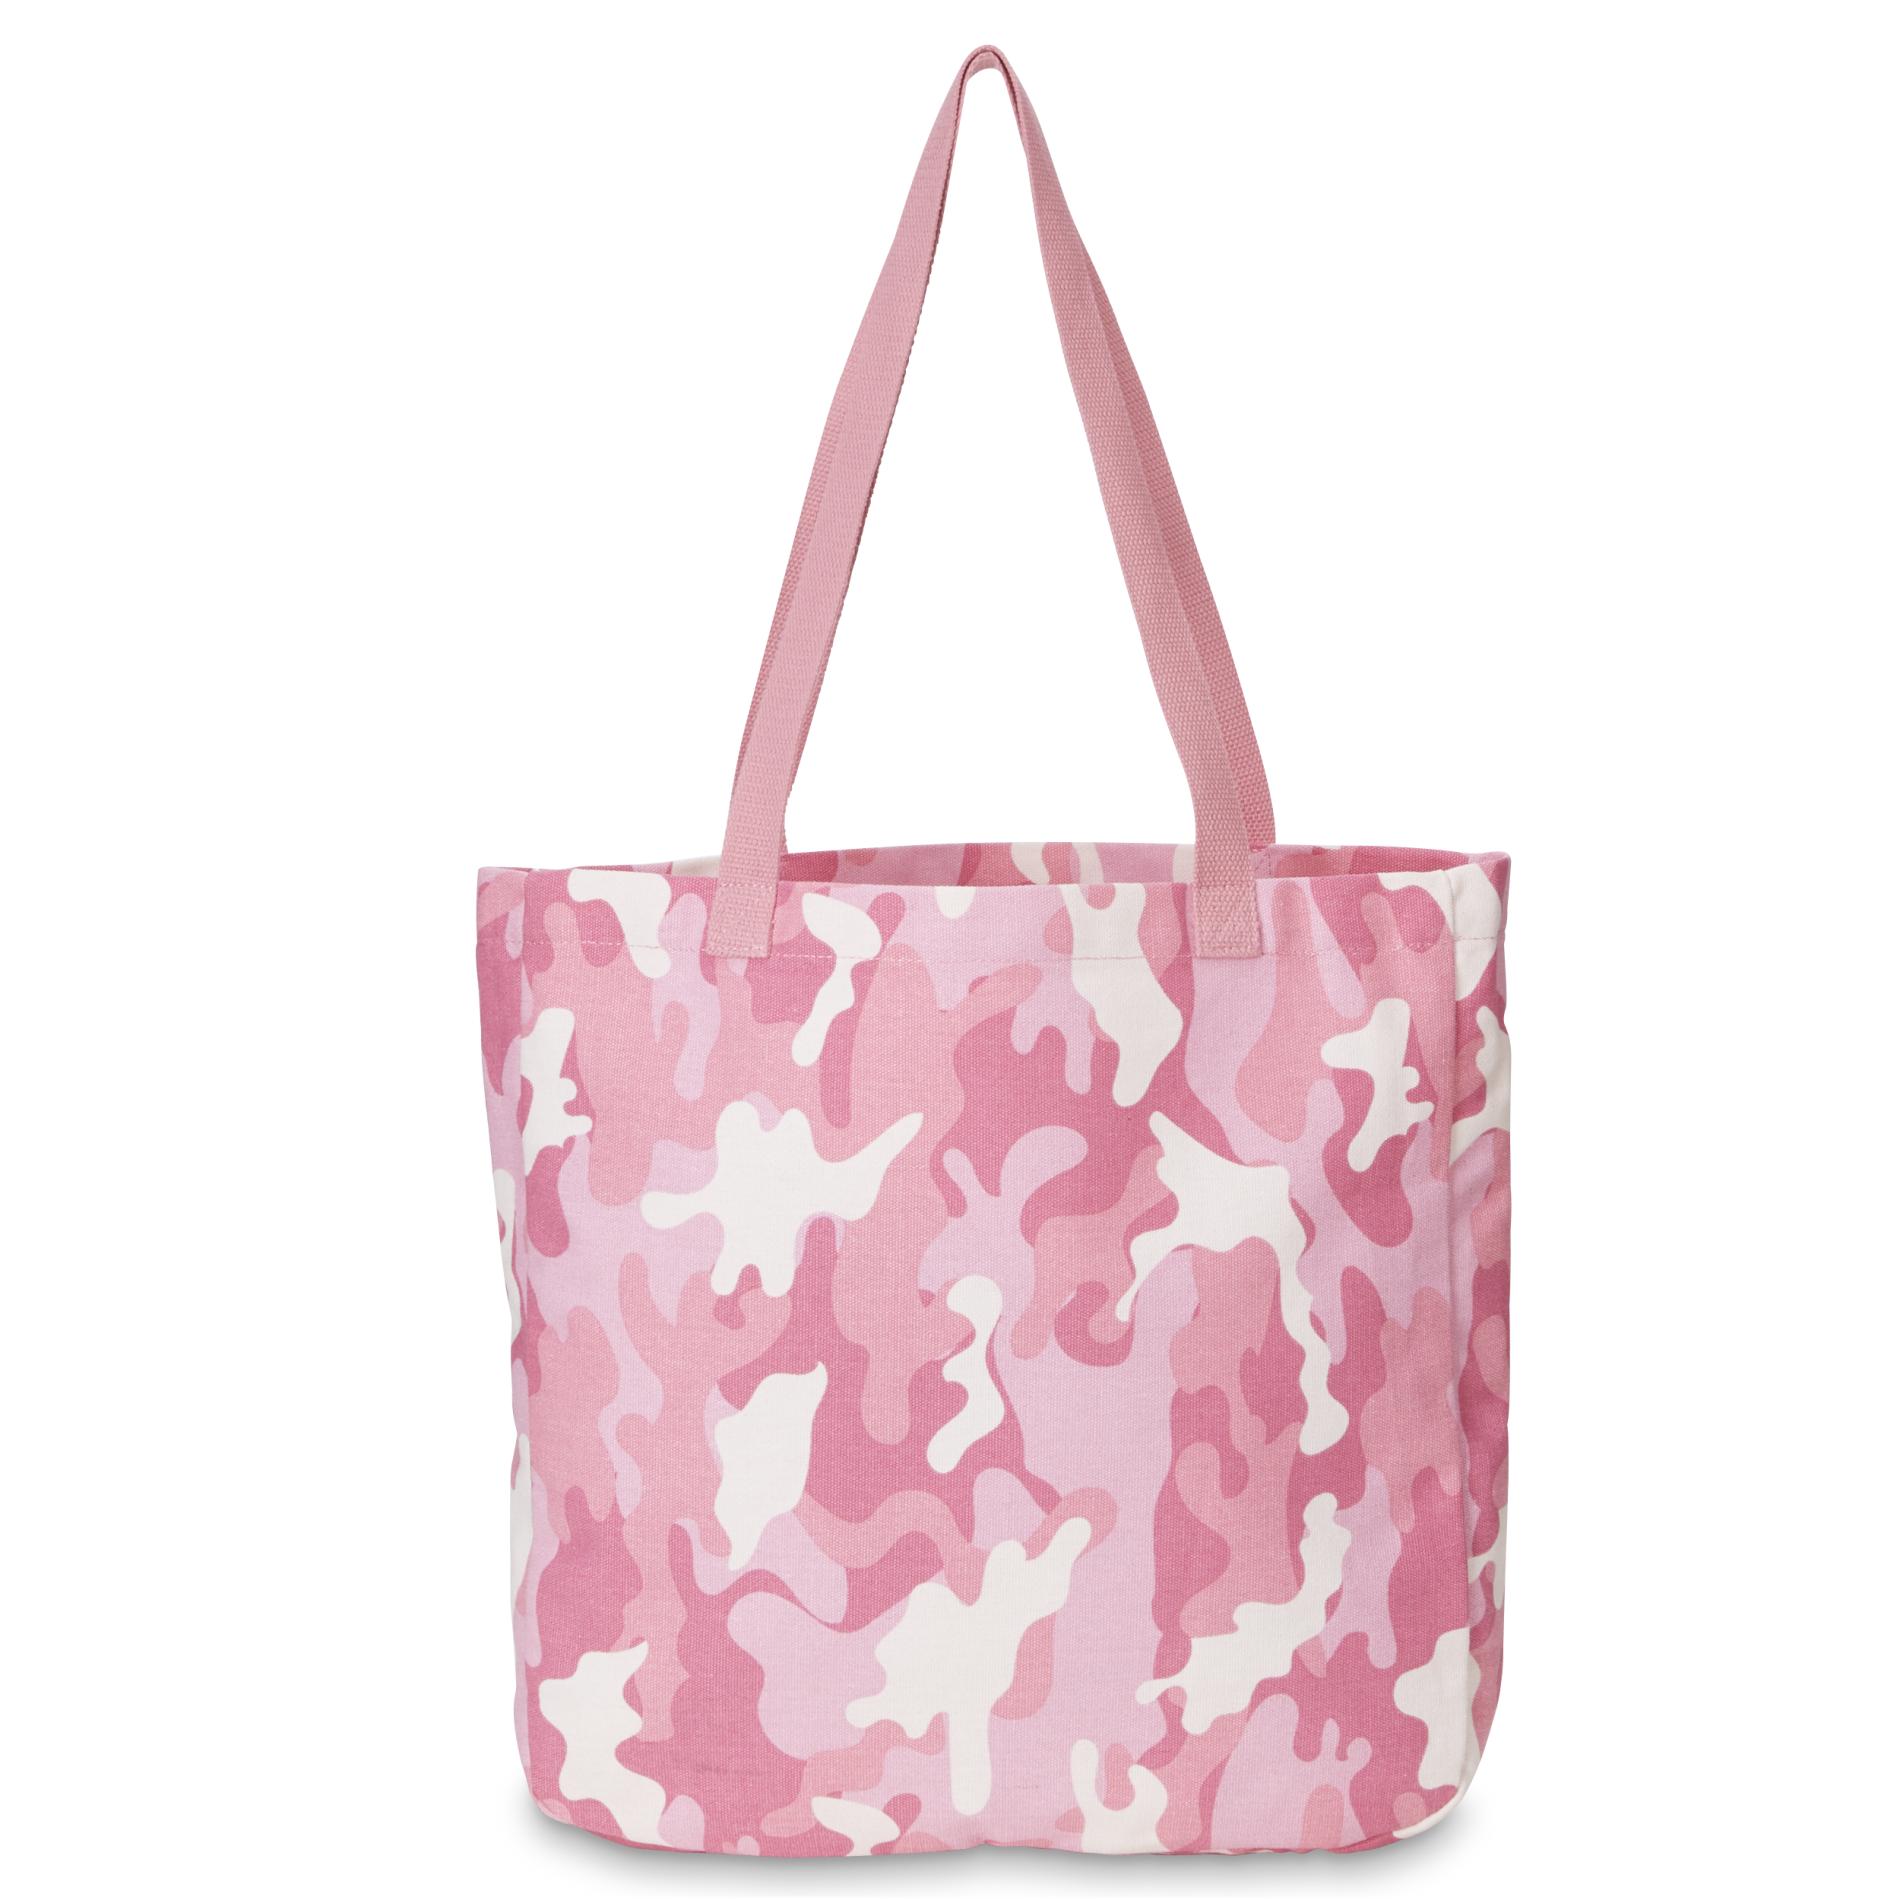 Women's Tote Bag - Camouflage